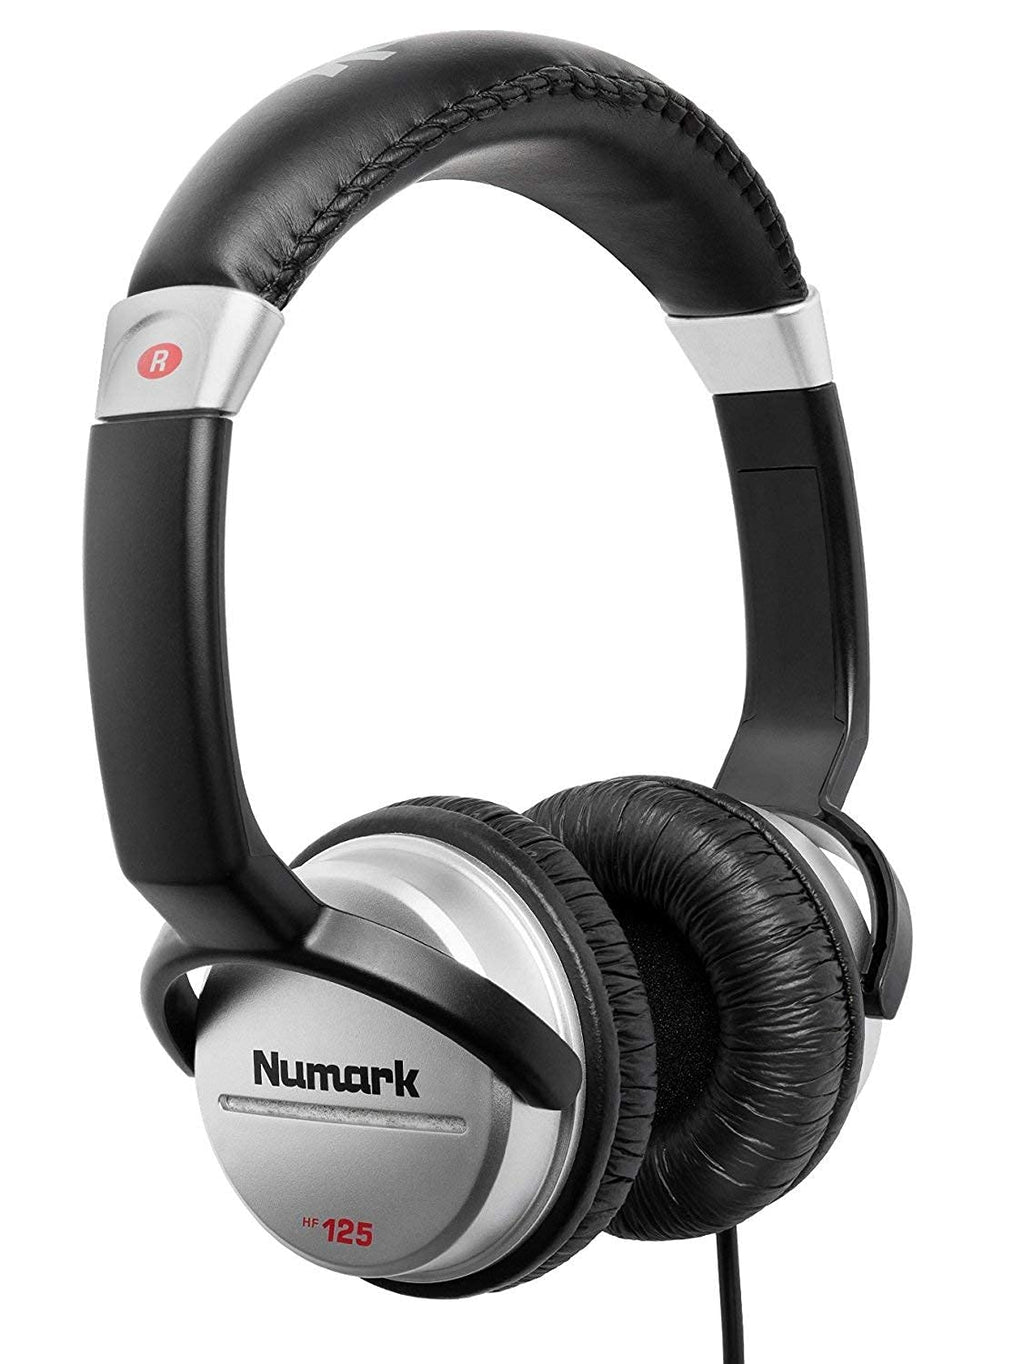 Numark HF125 - Ultra-Portable Professional DJ Headphones with 6 ft Cable, 40 mm Drivers for Extended Response & Closed Back Design for Superior Isolation Оne Расk